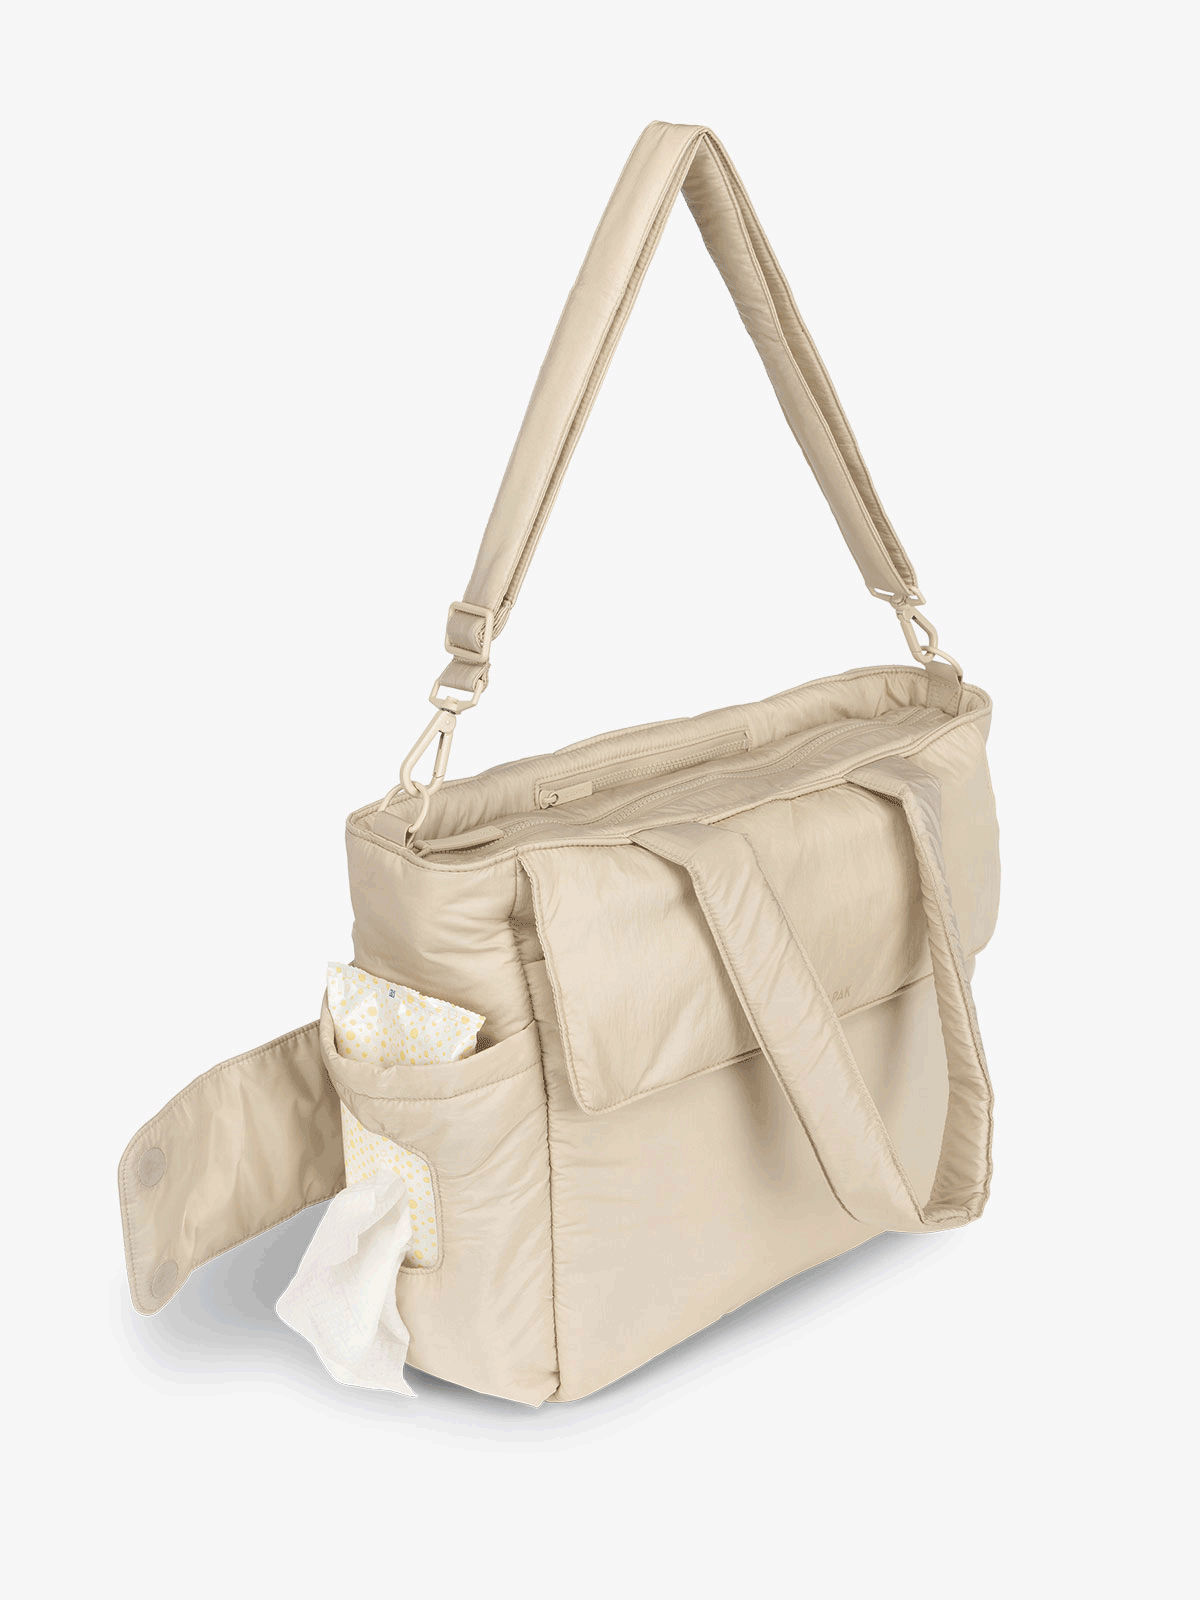 CALPAK diaper tote bag with baby wipe compartment in beige